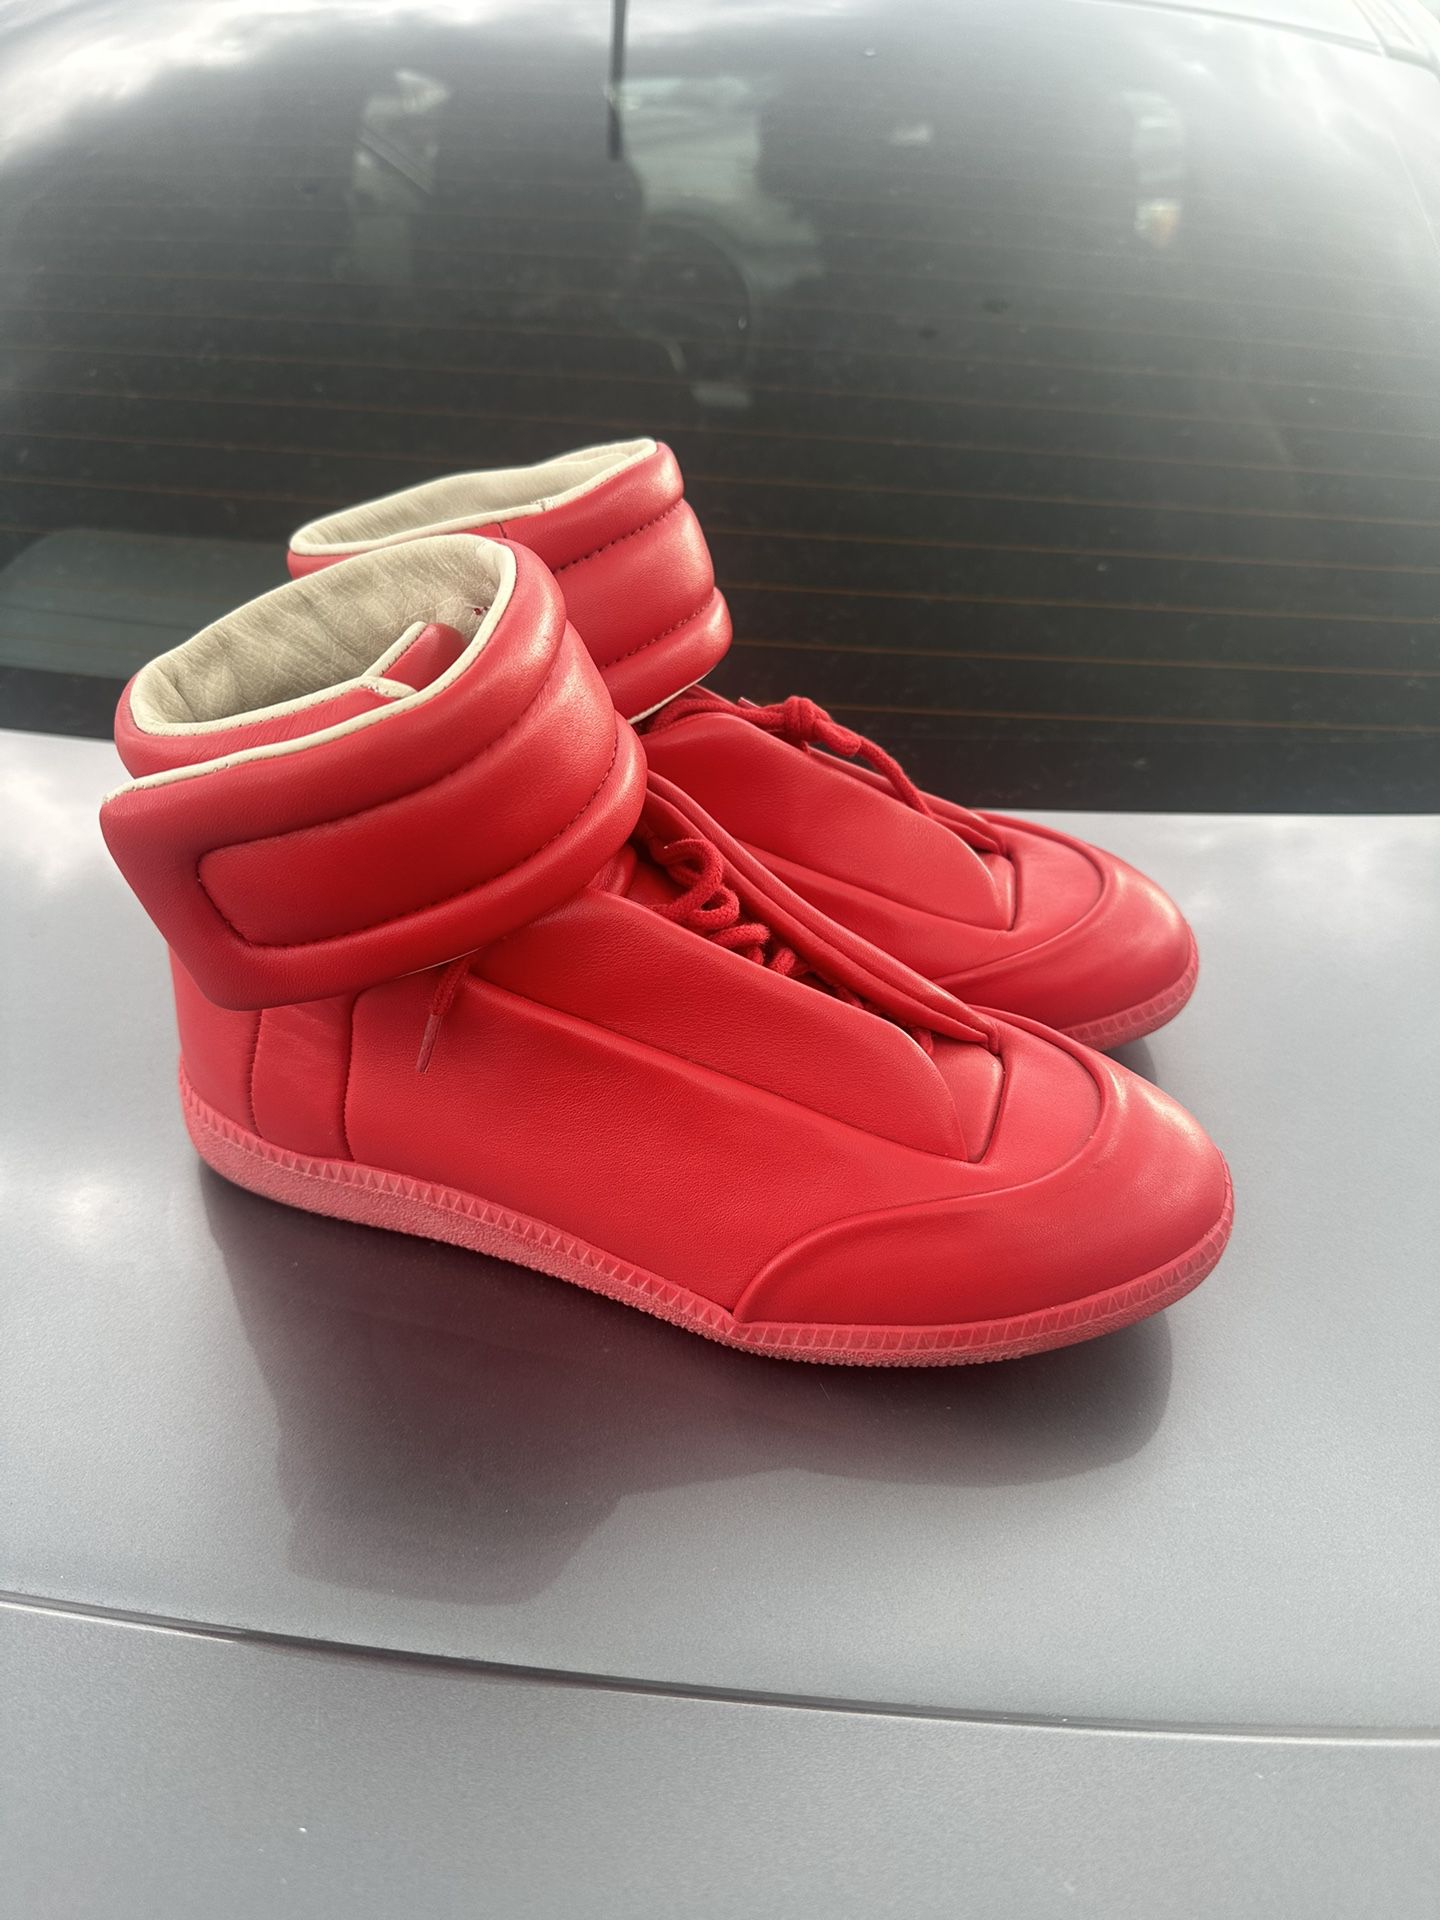 Maison Sneakers Red for Sale in TX - OfferUp